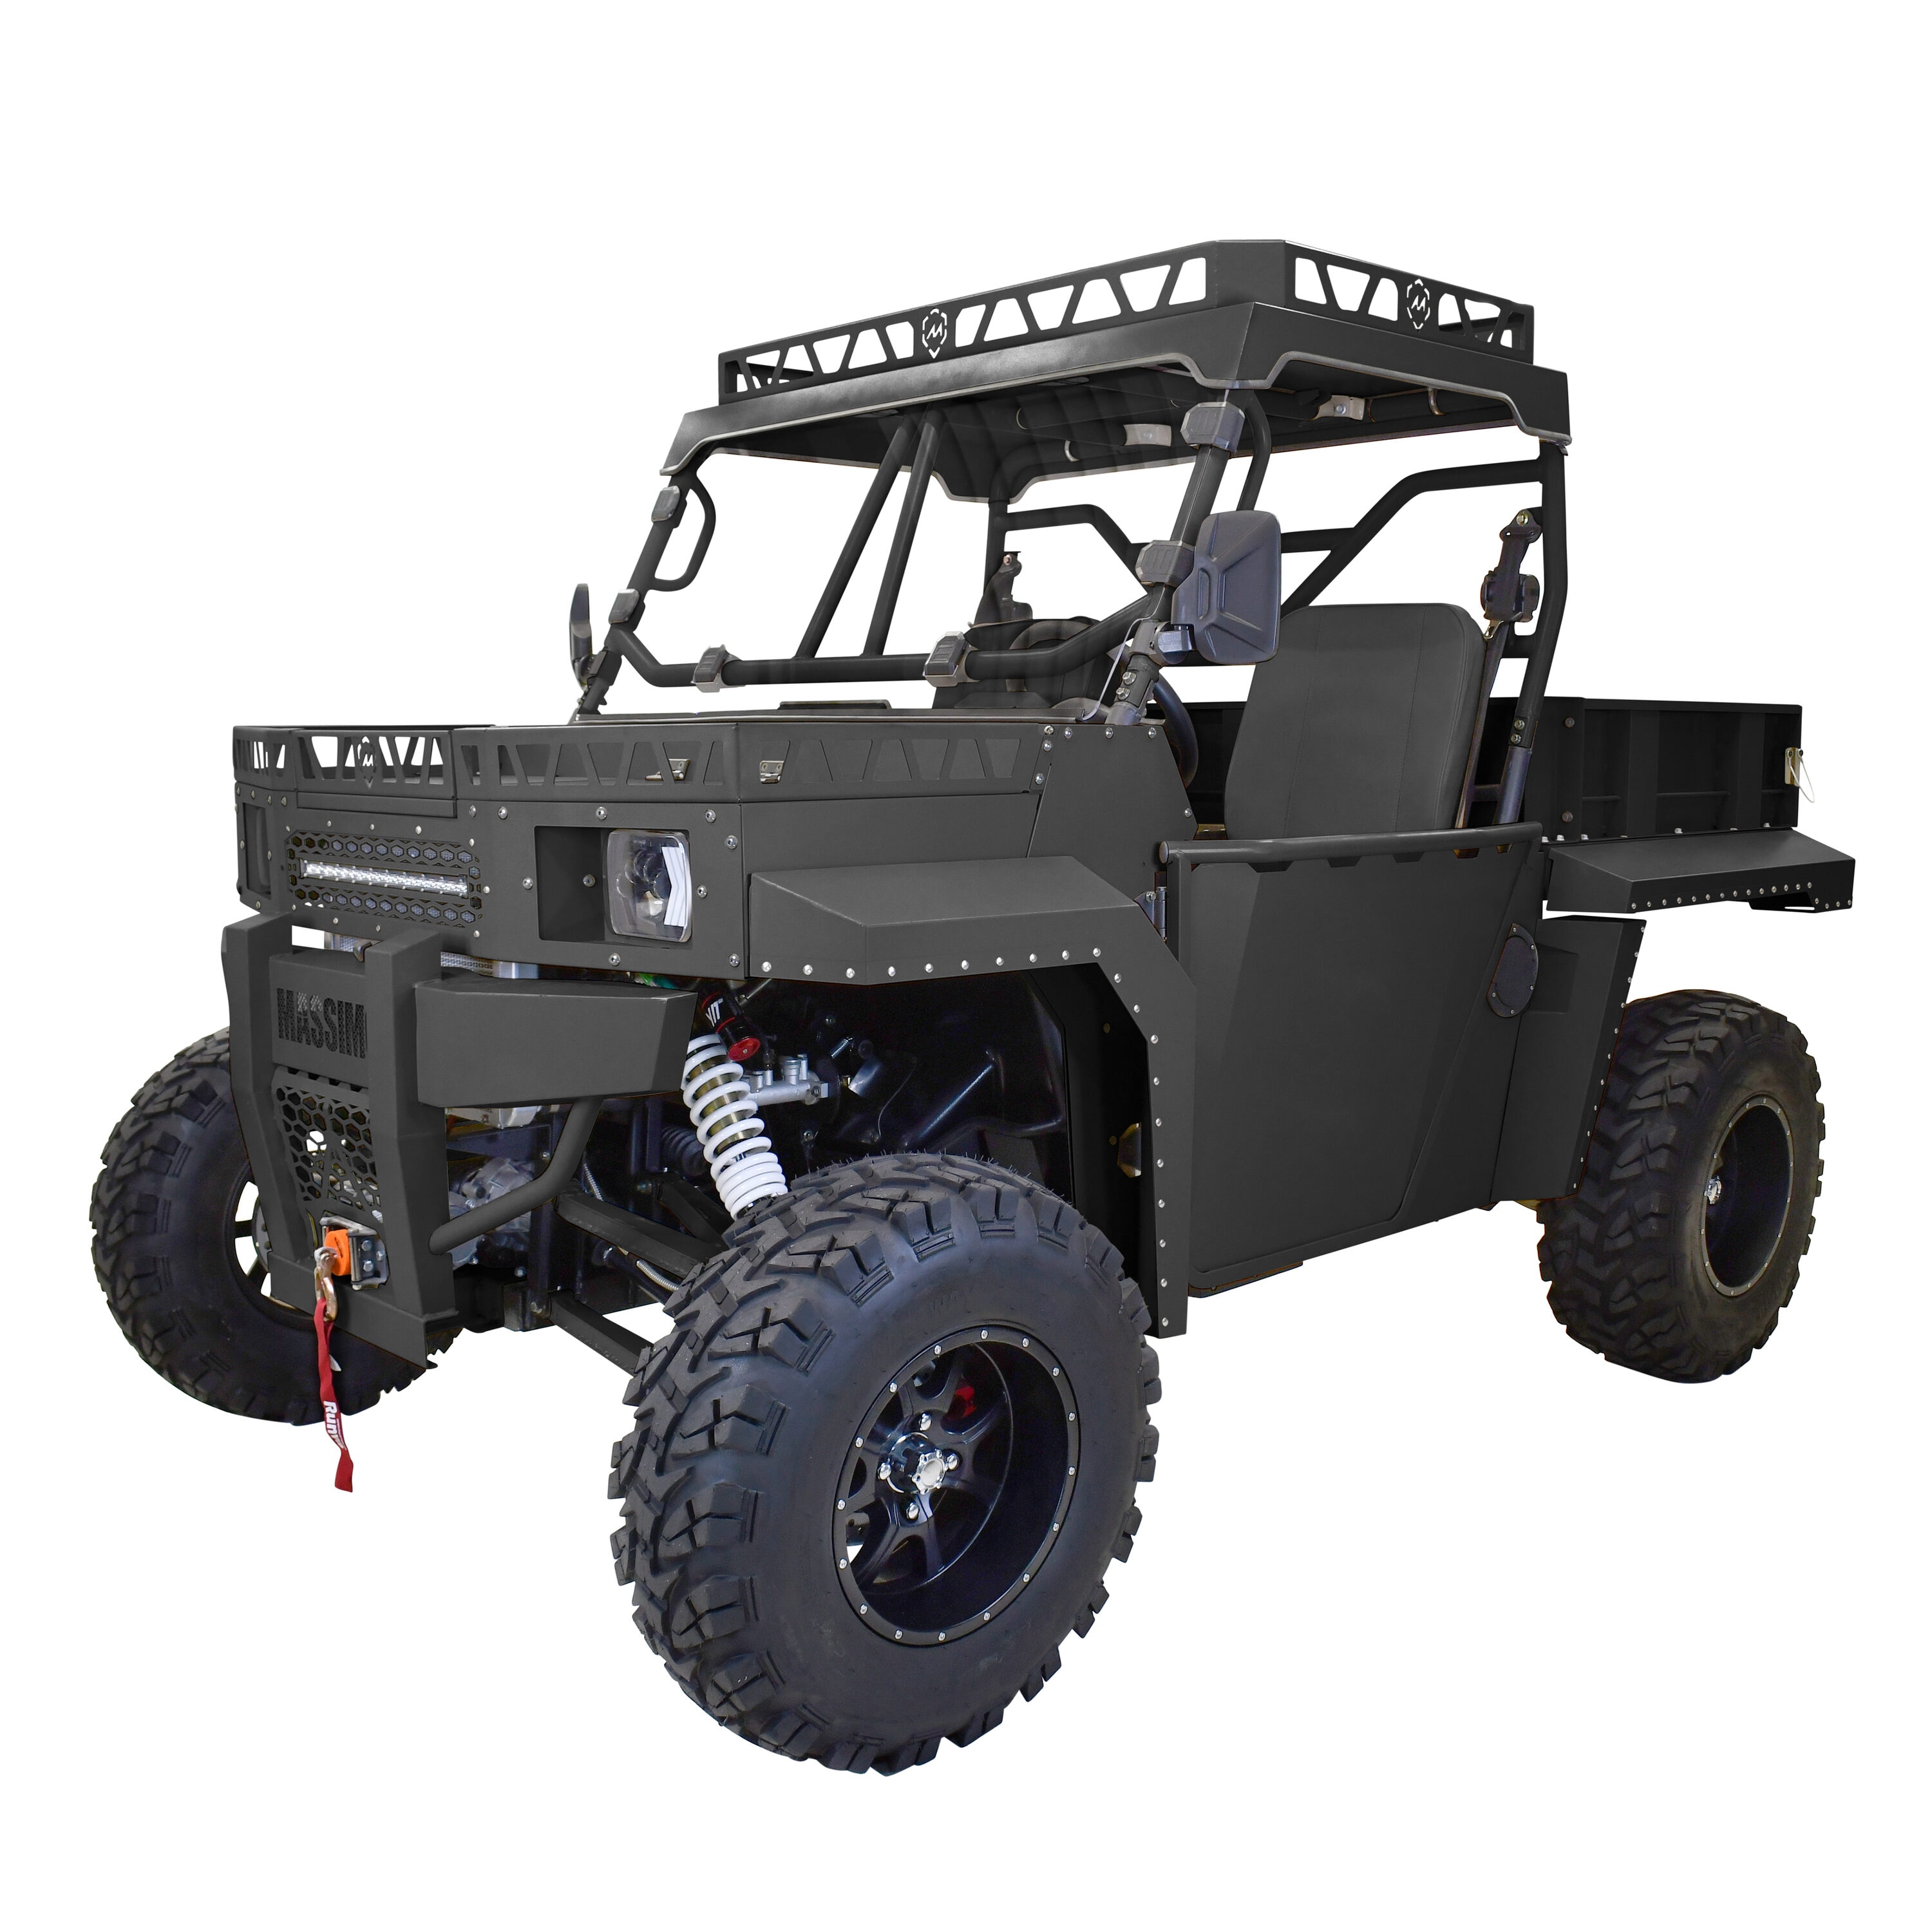 Robust massimo 1000 utv for Recreation and Off-road Driving –